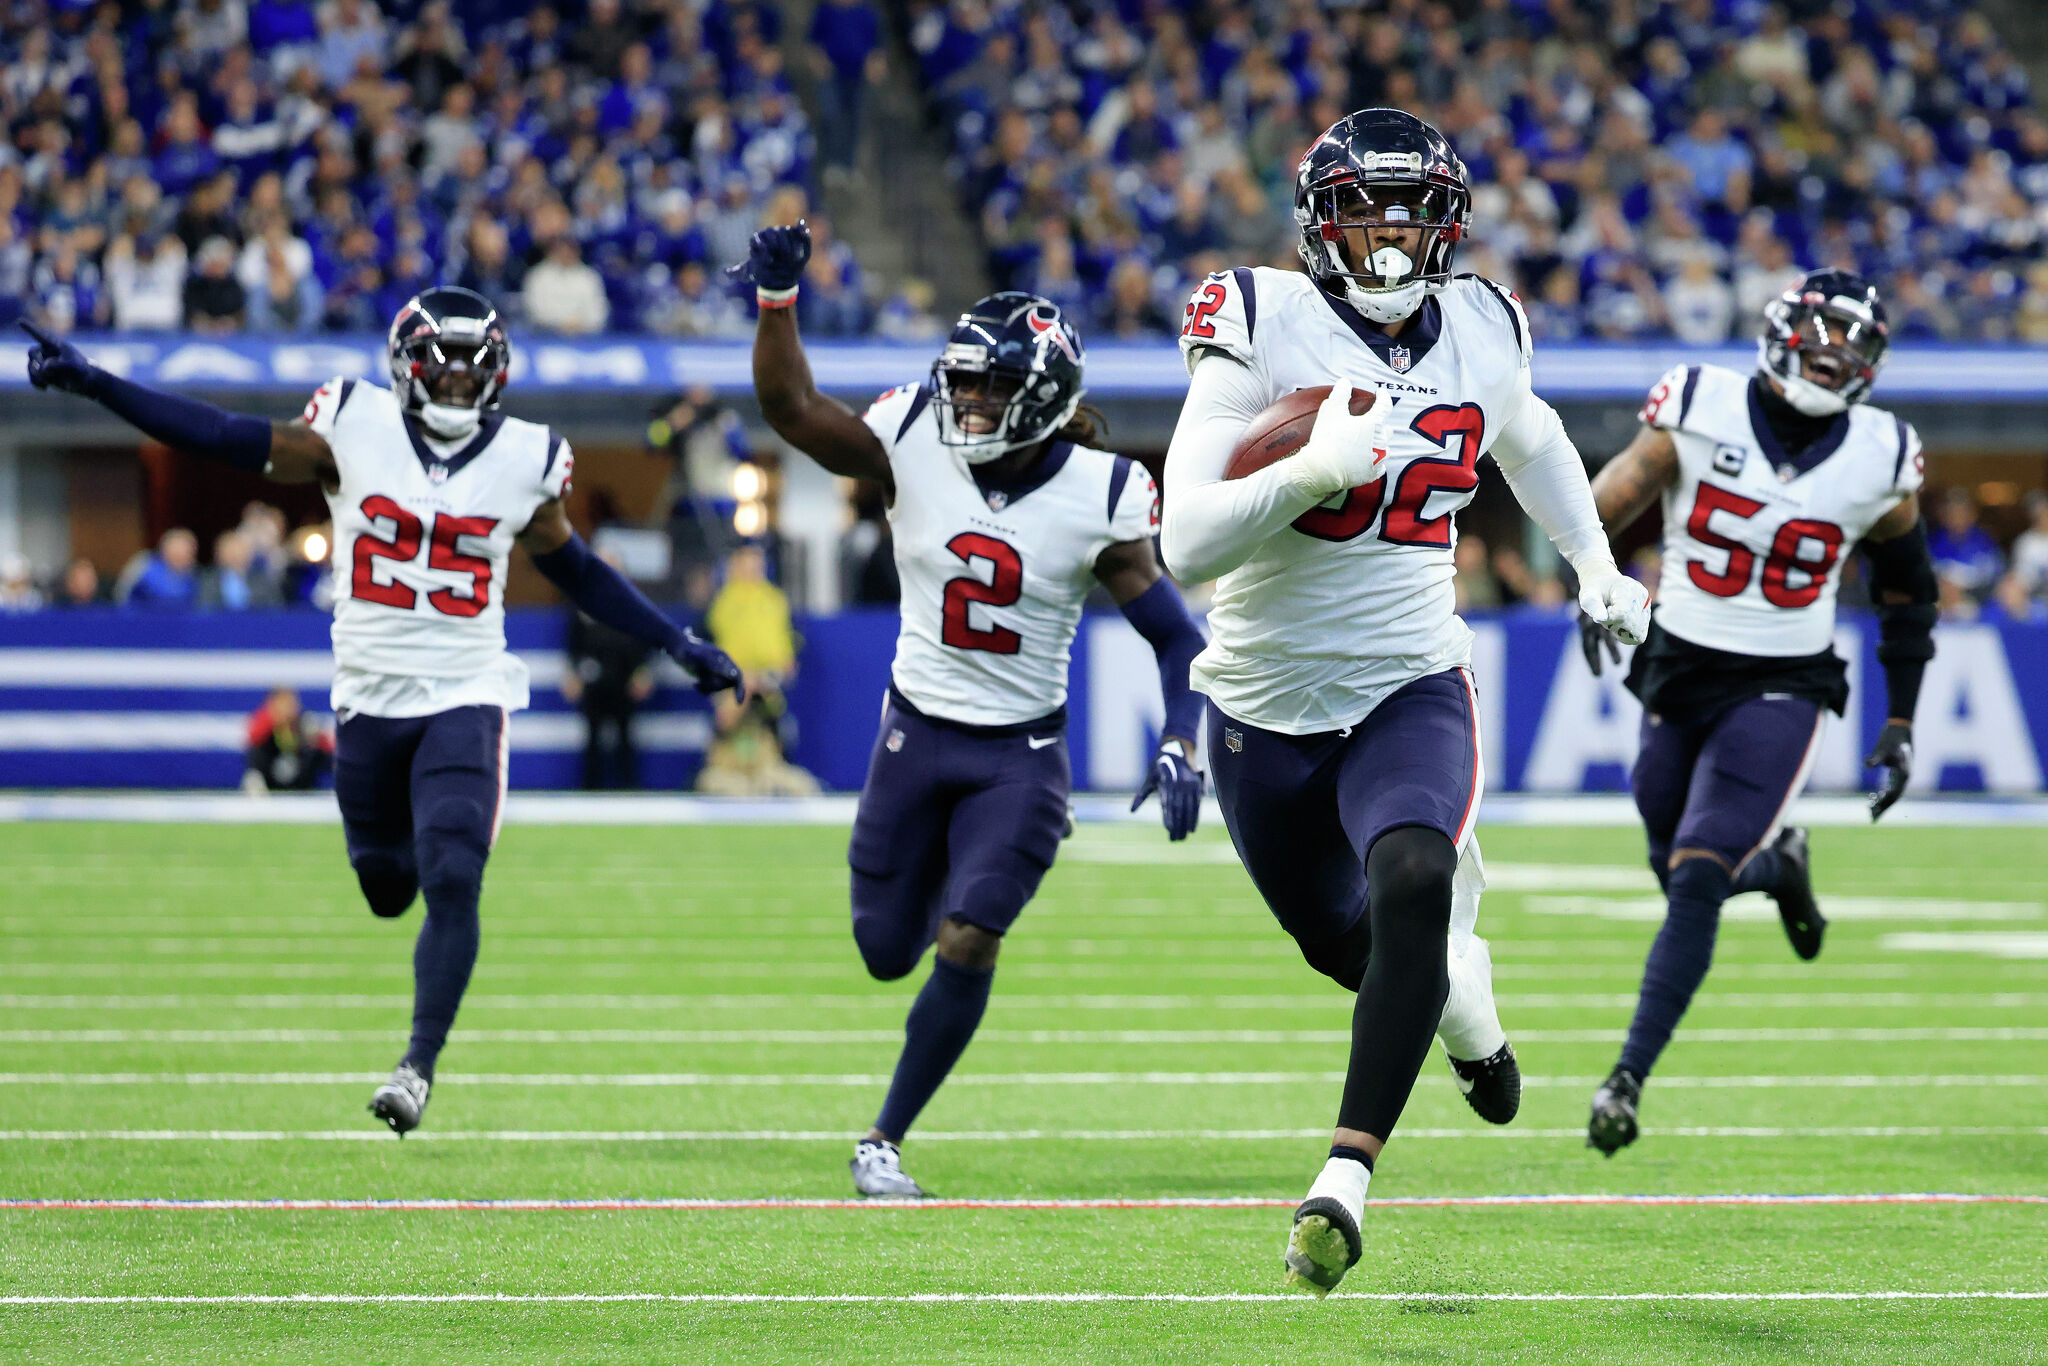 How to stream the Texans vs Colts game on Sunday, Sept 17